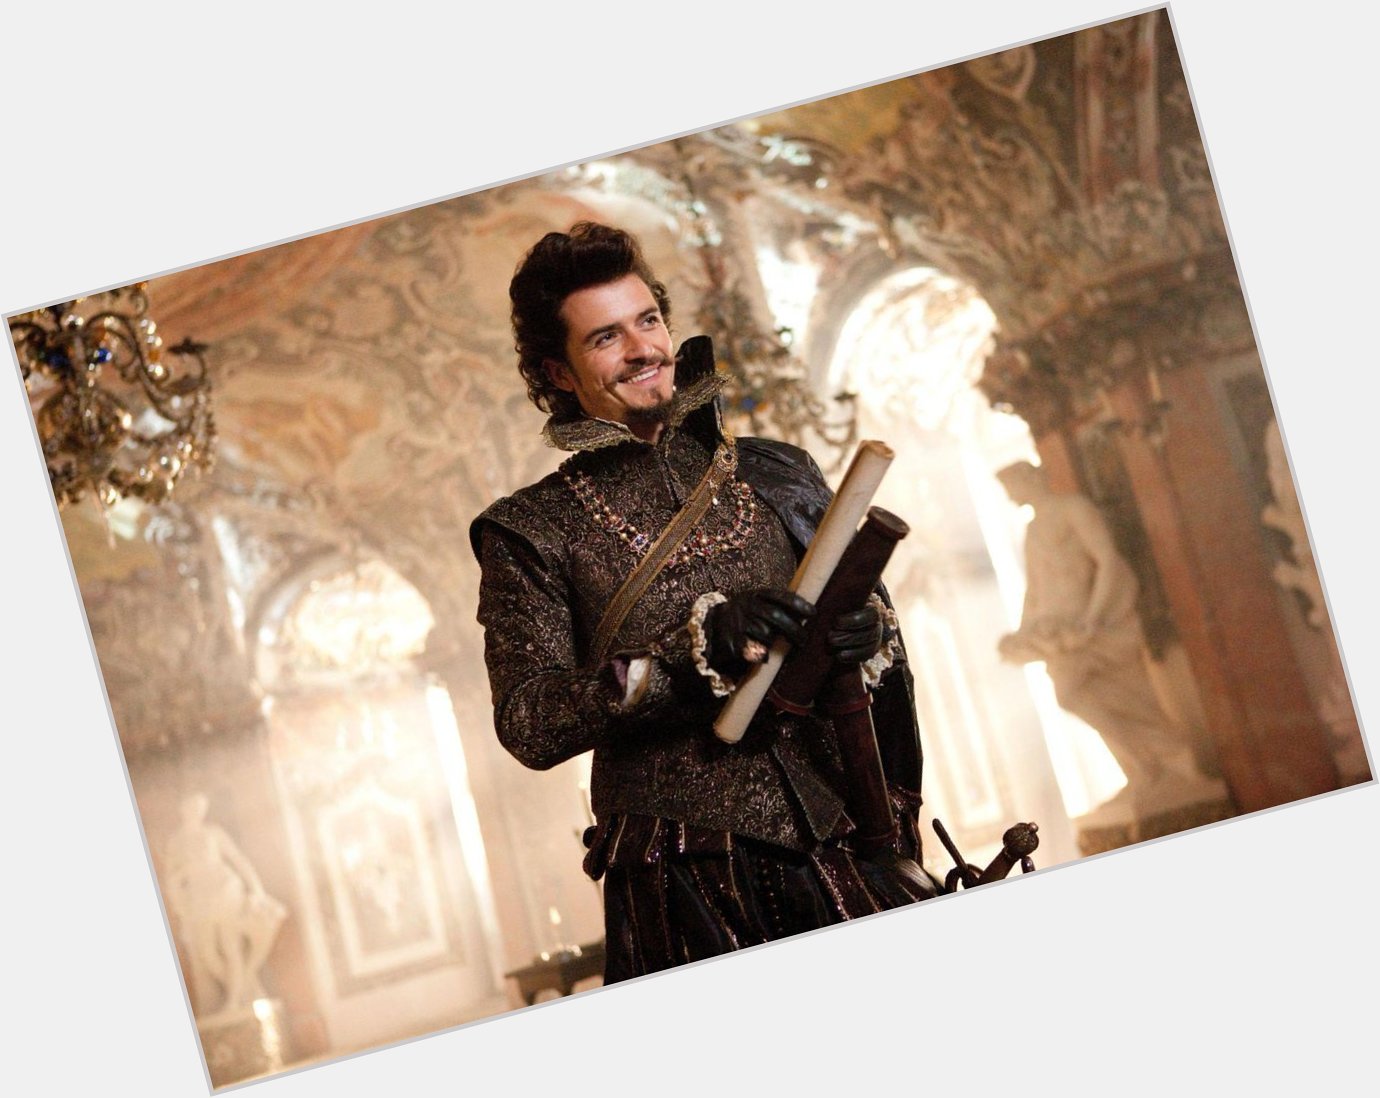 Happy Orlando Bloom\s birthday everyone! Watch Three Musketeers cause it is lit and he is great. 